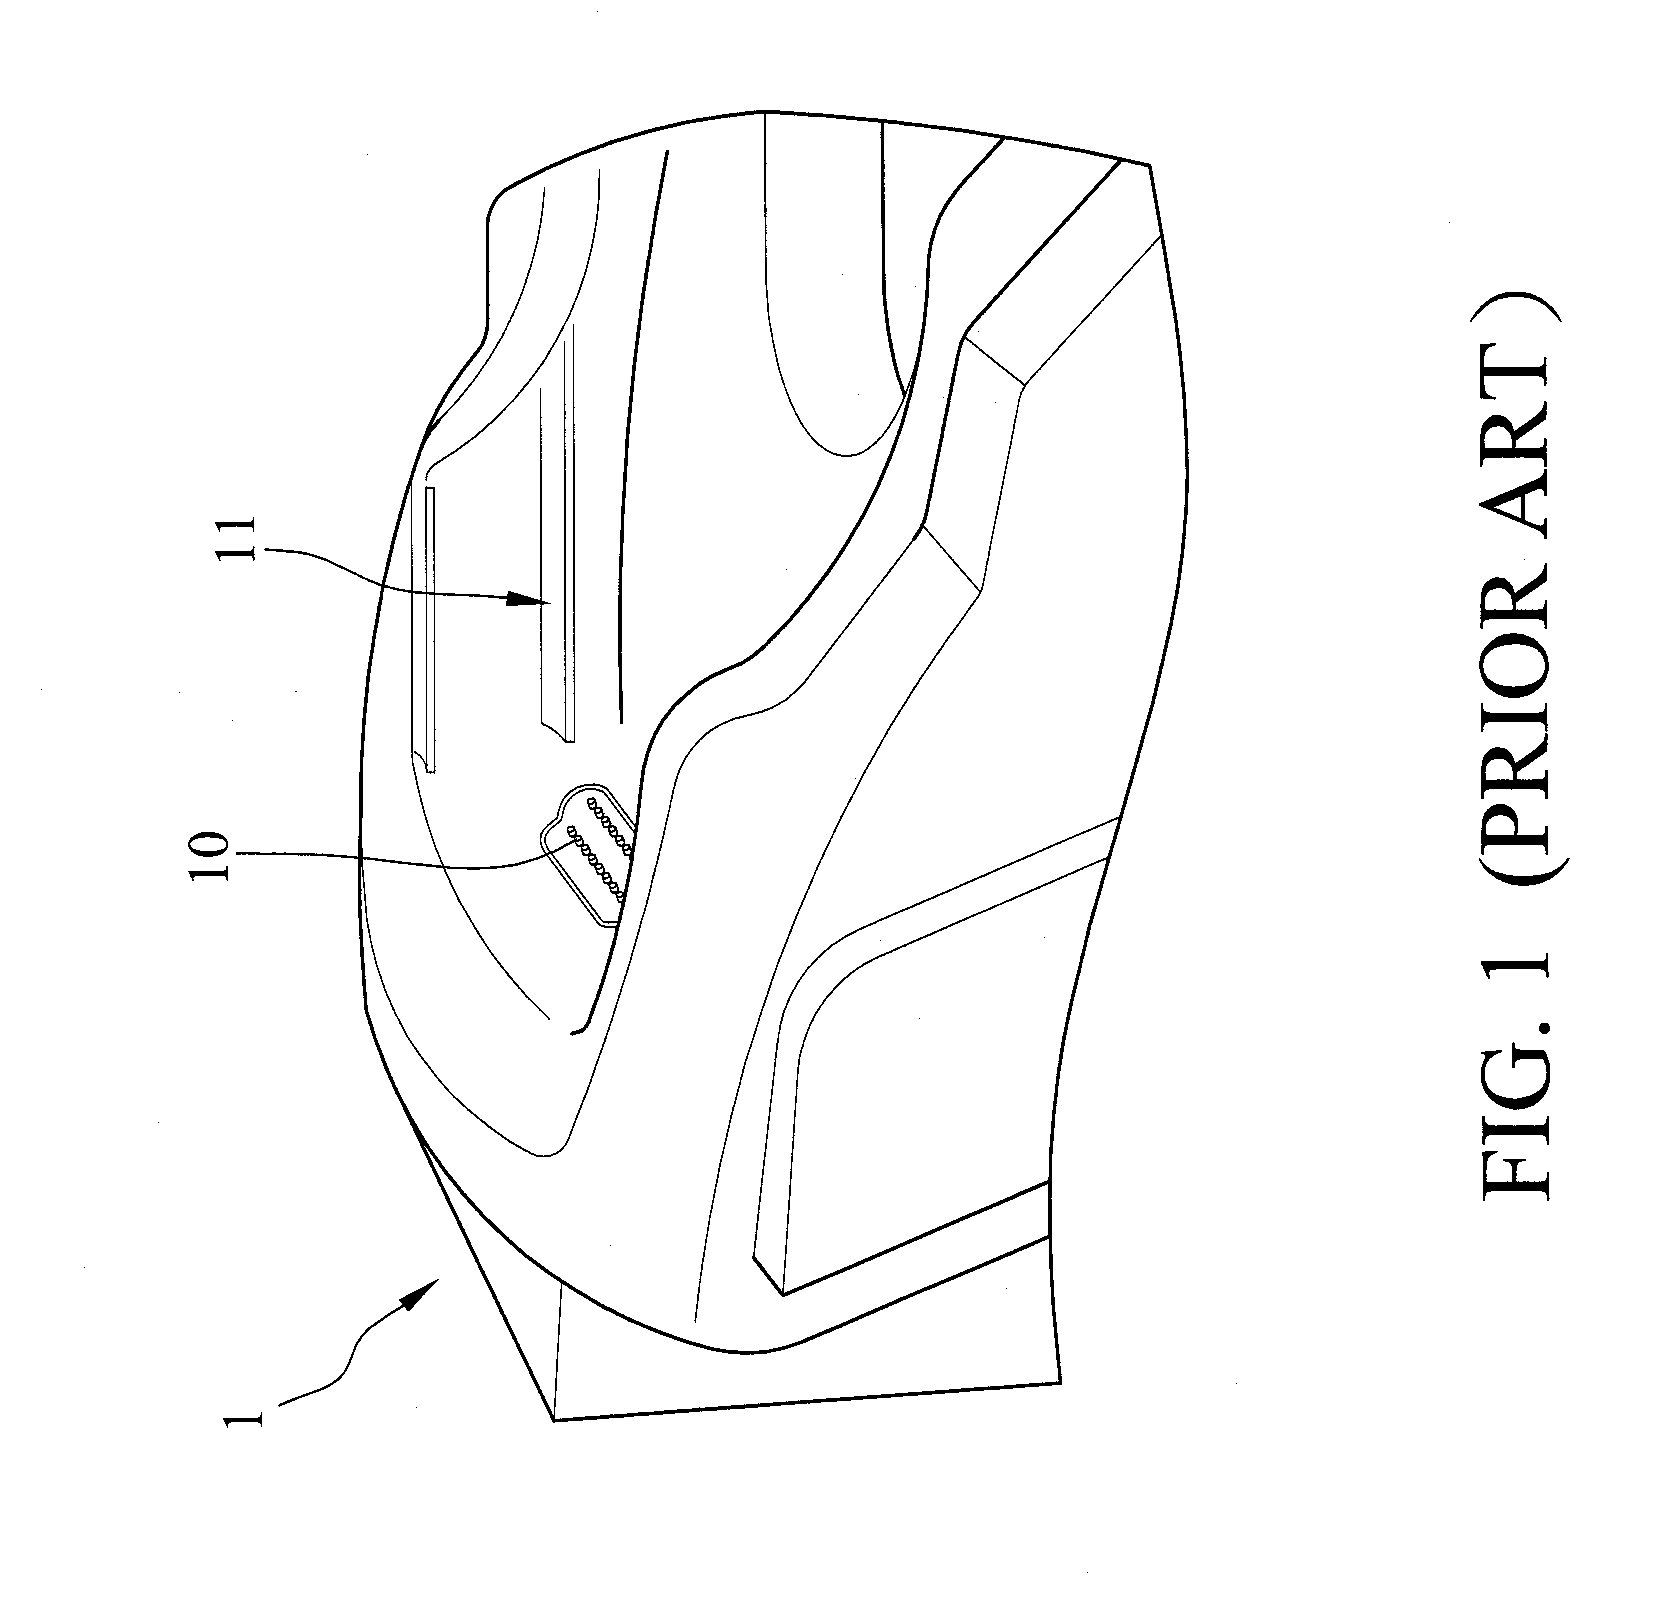 Inspection Device Applying Probe Contact for Signal Transmission